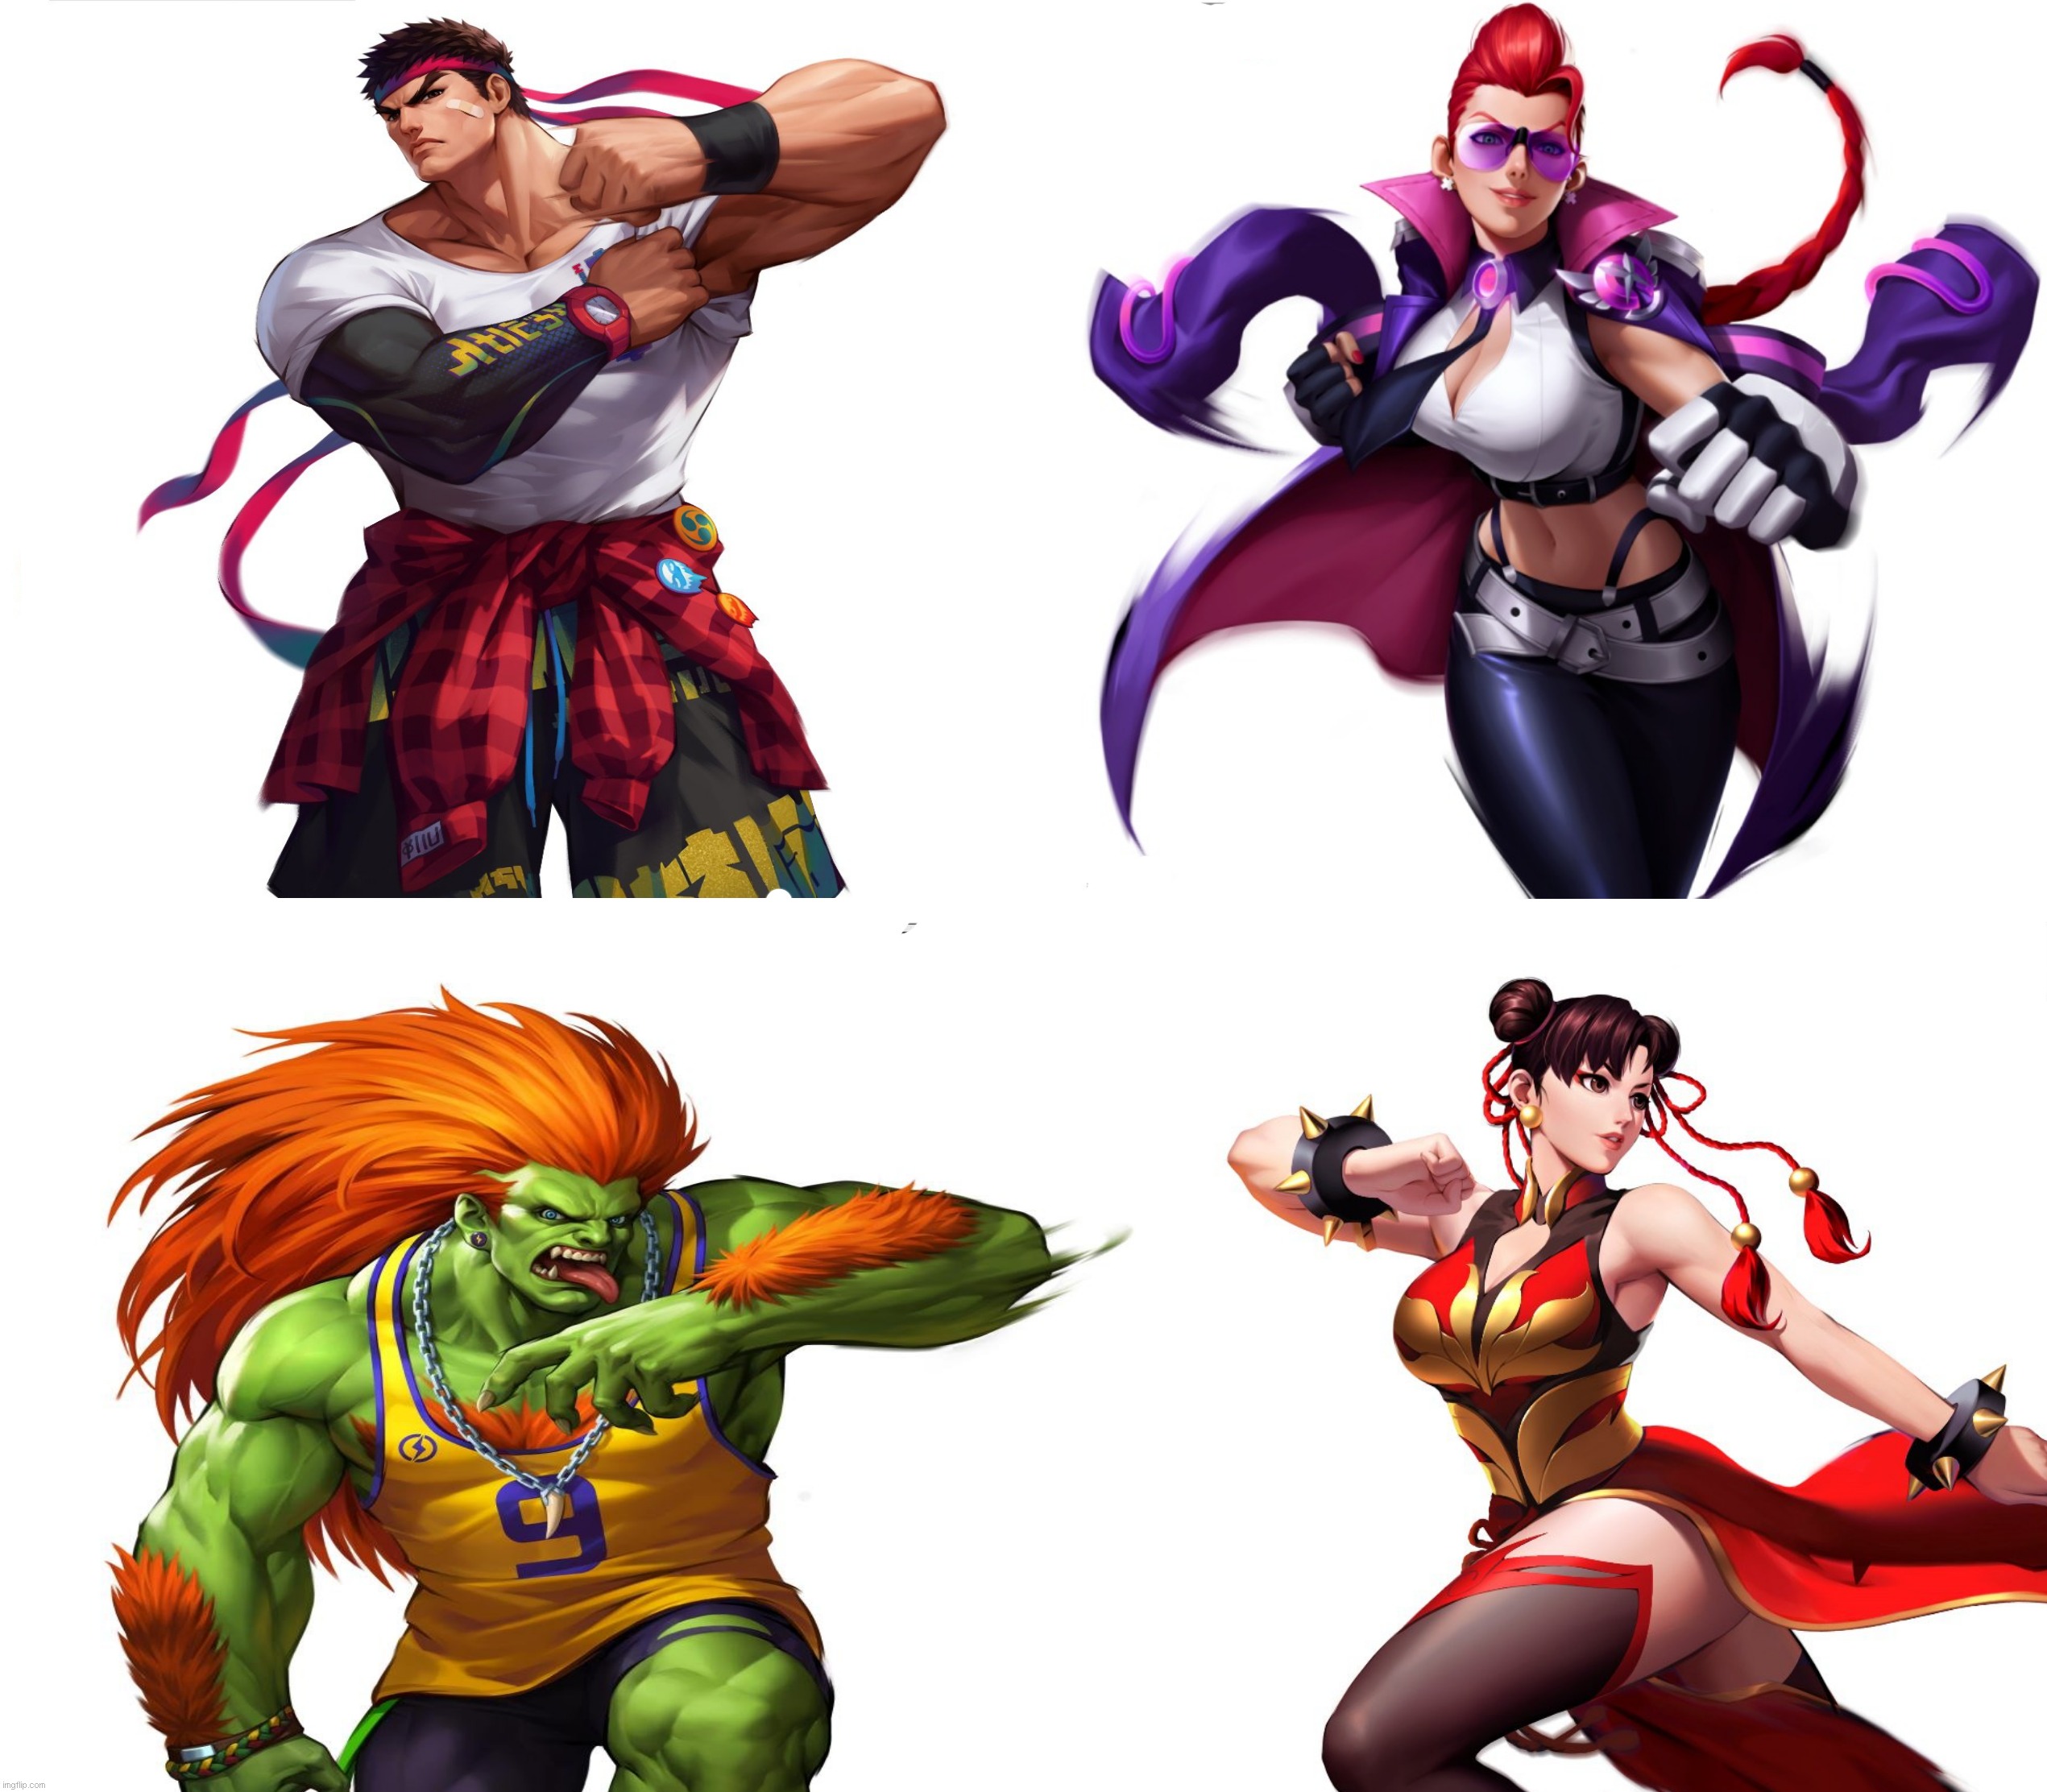 Even more alternate costumes from the China-only mobile game